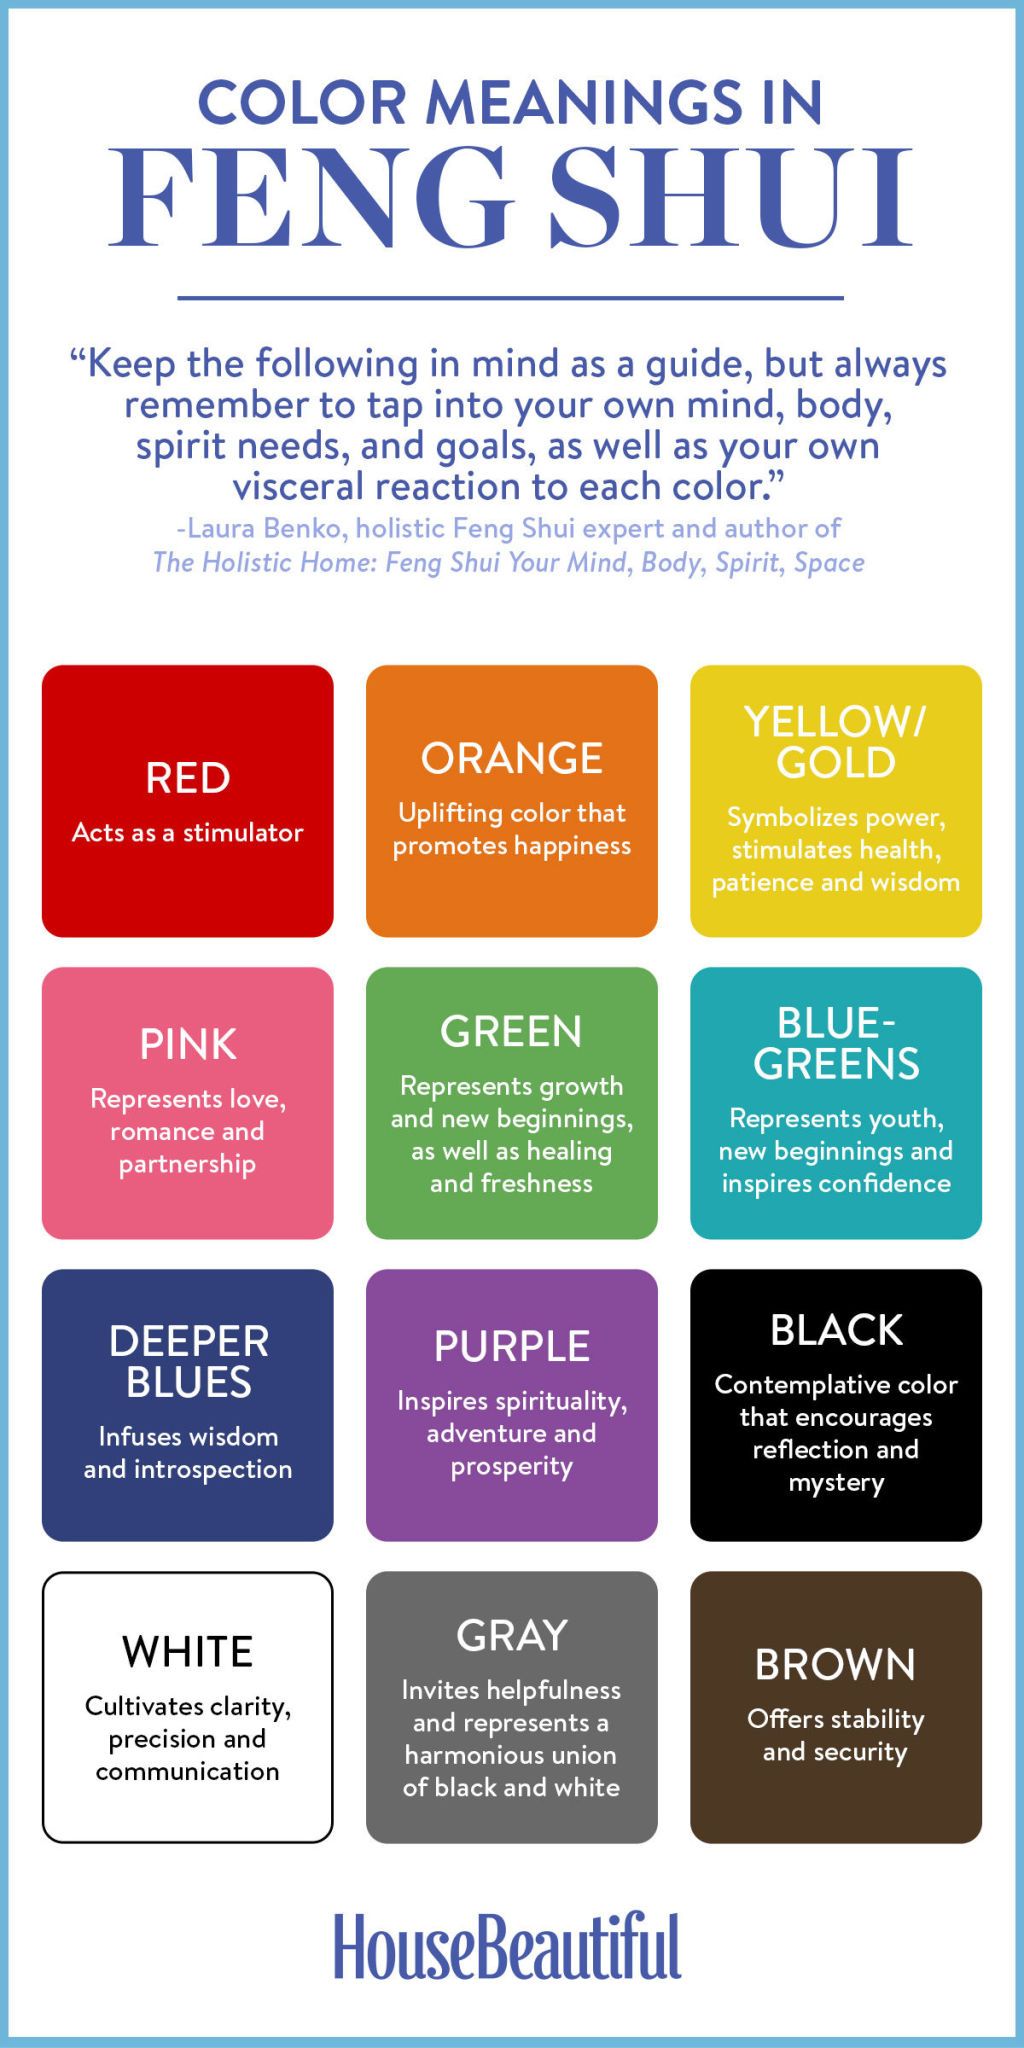 Color Meanings in Feng Shui - Feng Shui Guide to Color